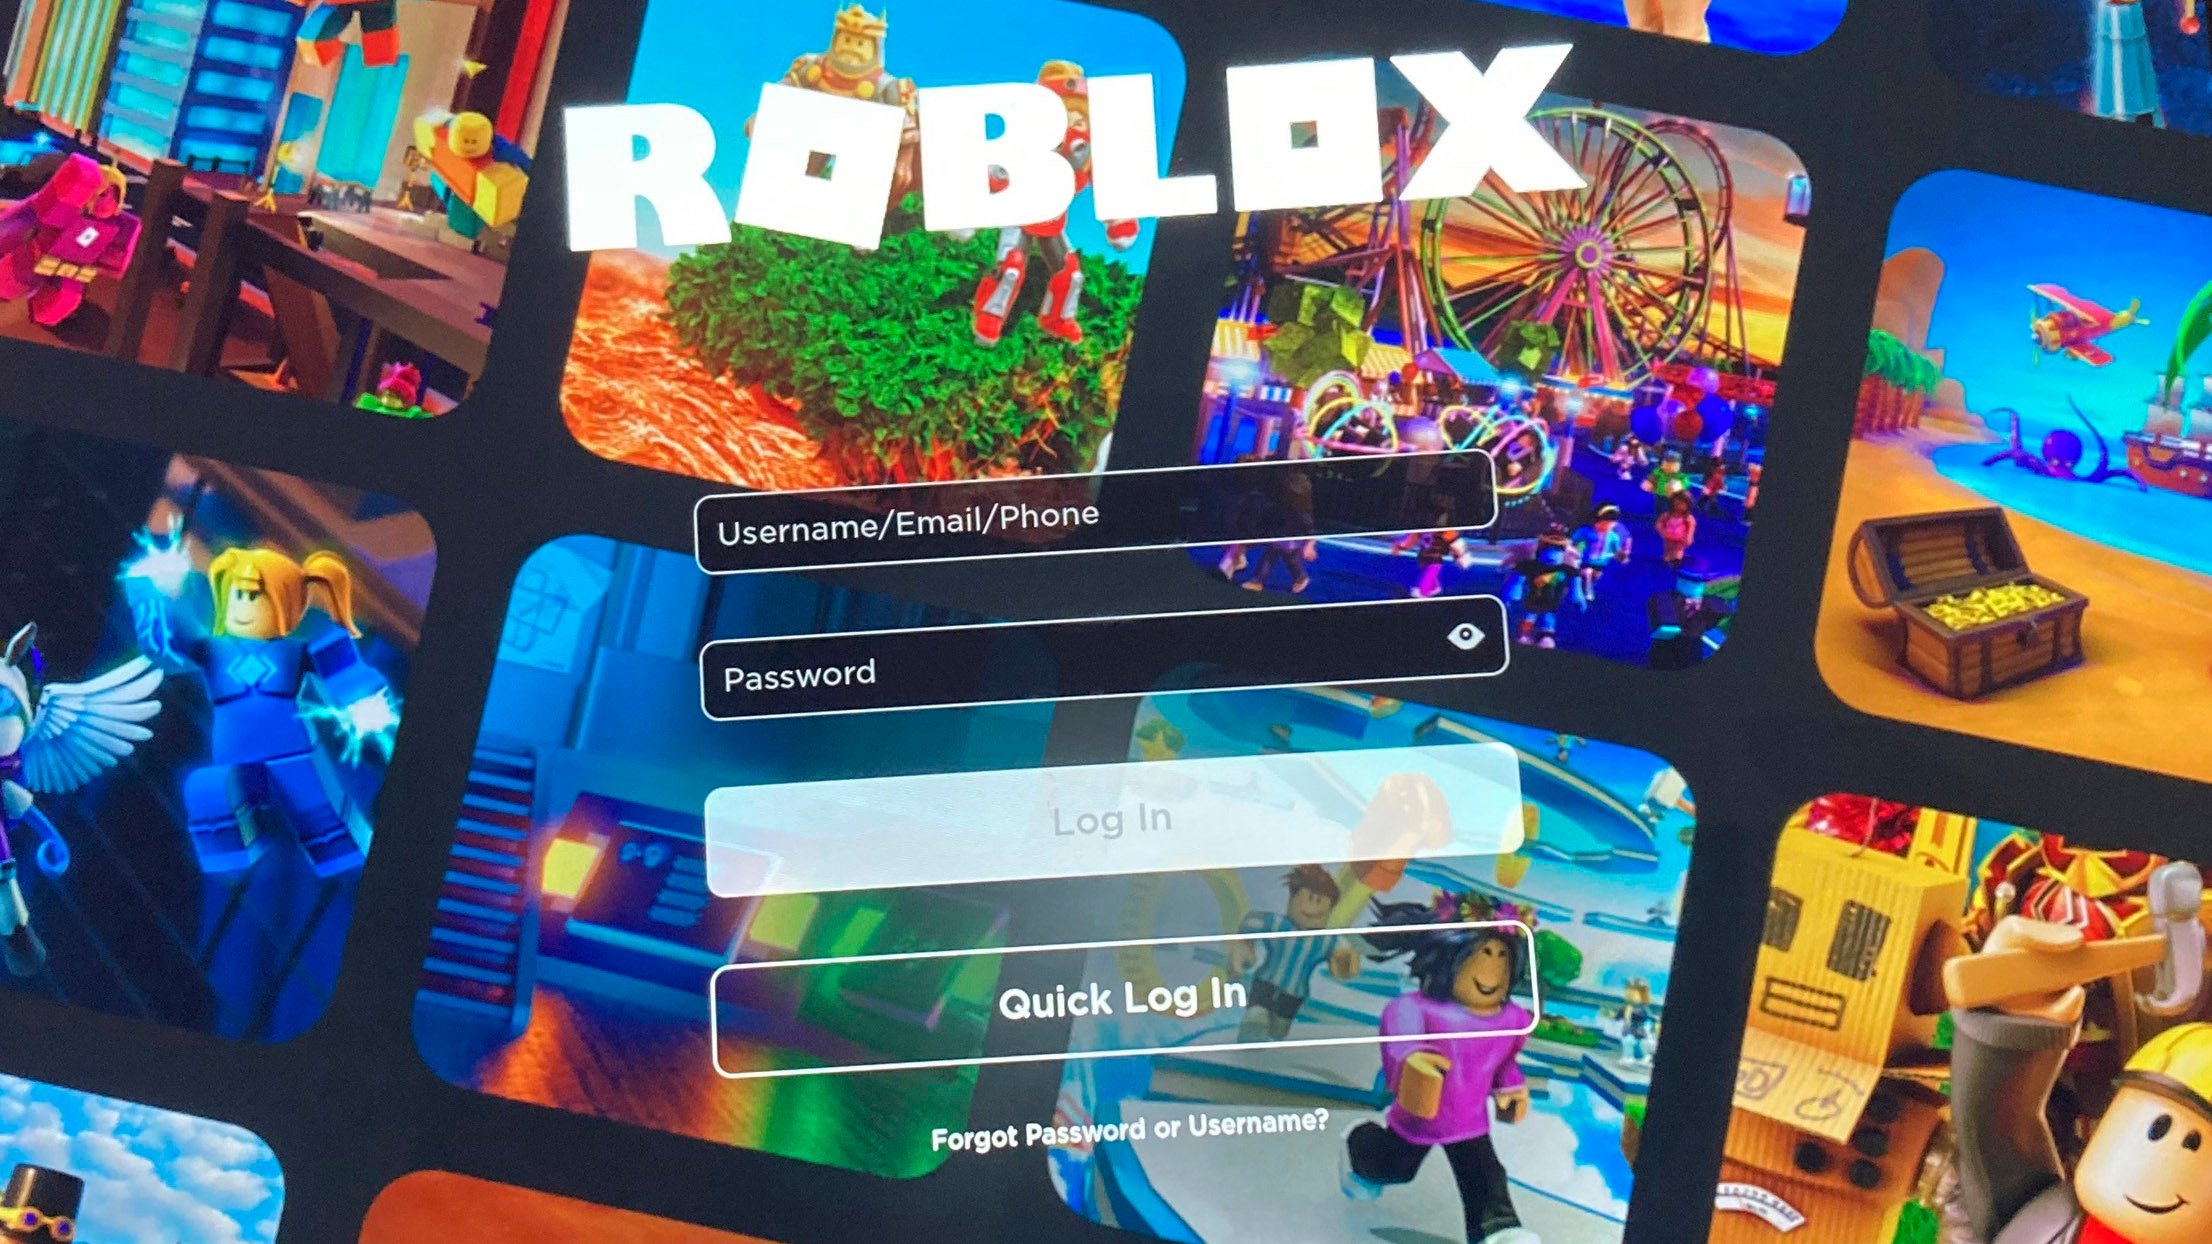 Would Roblox Allow These Fake URLs - Art Design Support